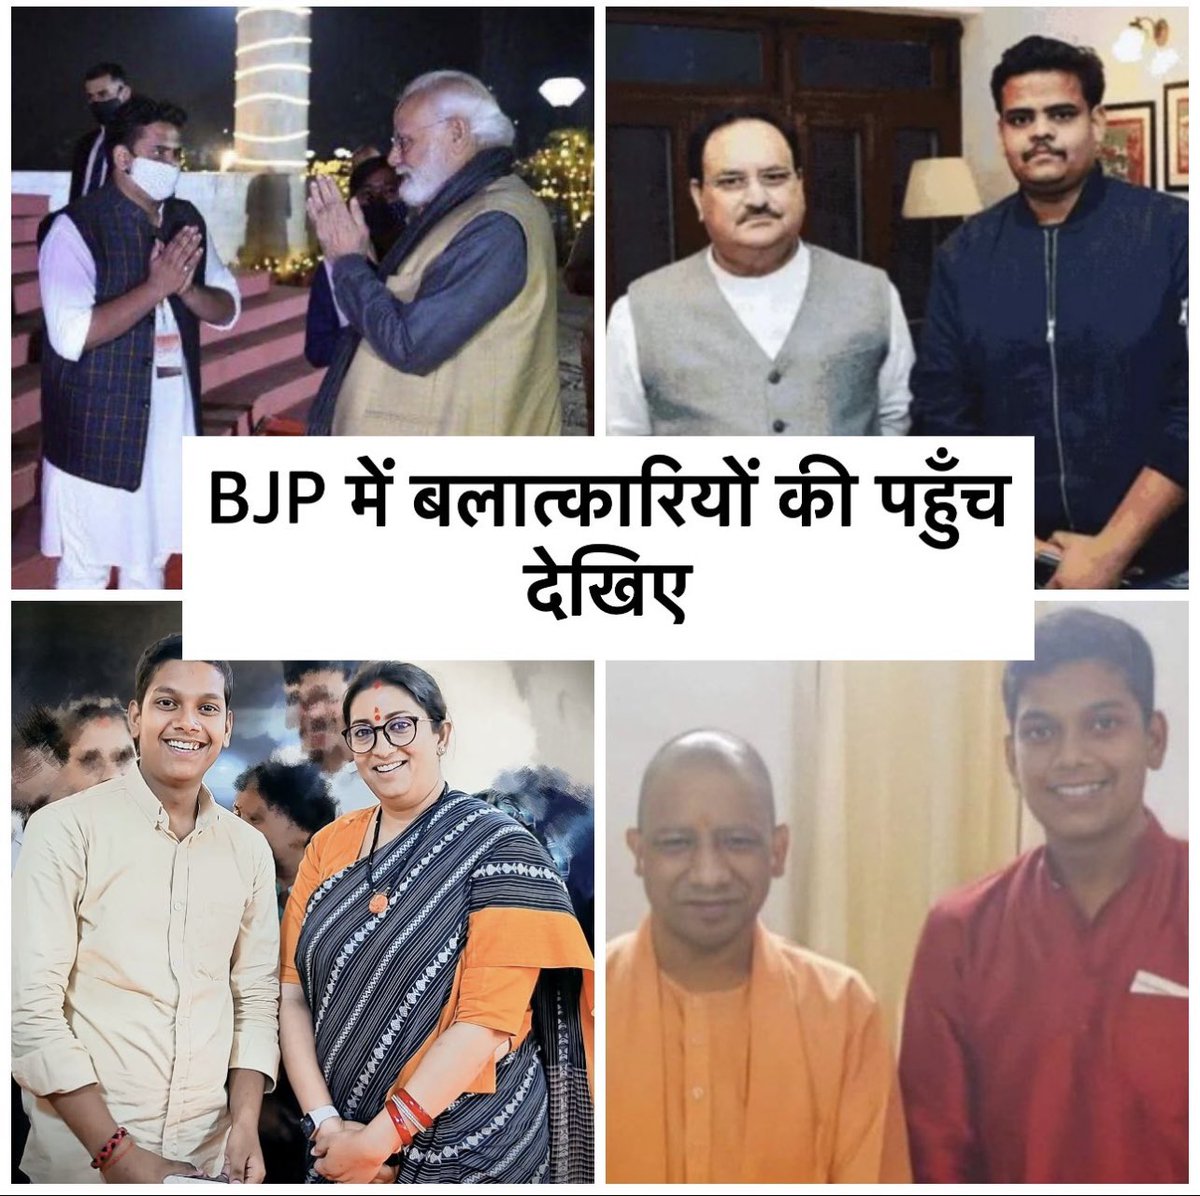 From convicted rapists to an IT cell full of gang rapists and molesters Why does the BJP promote and protect men like these?? #ModiKaBalatkariParivar